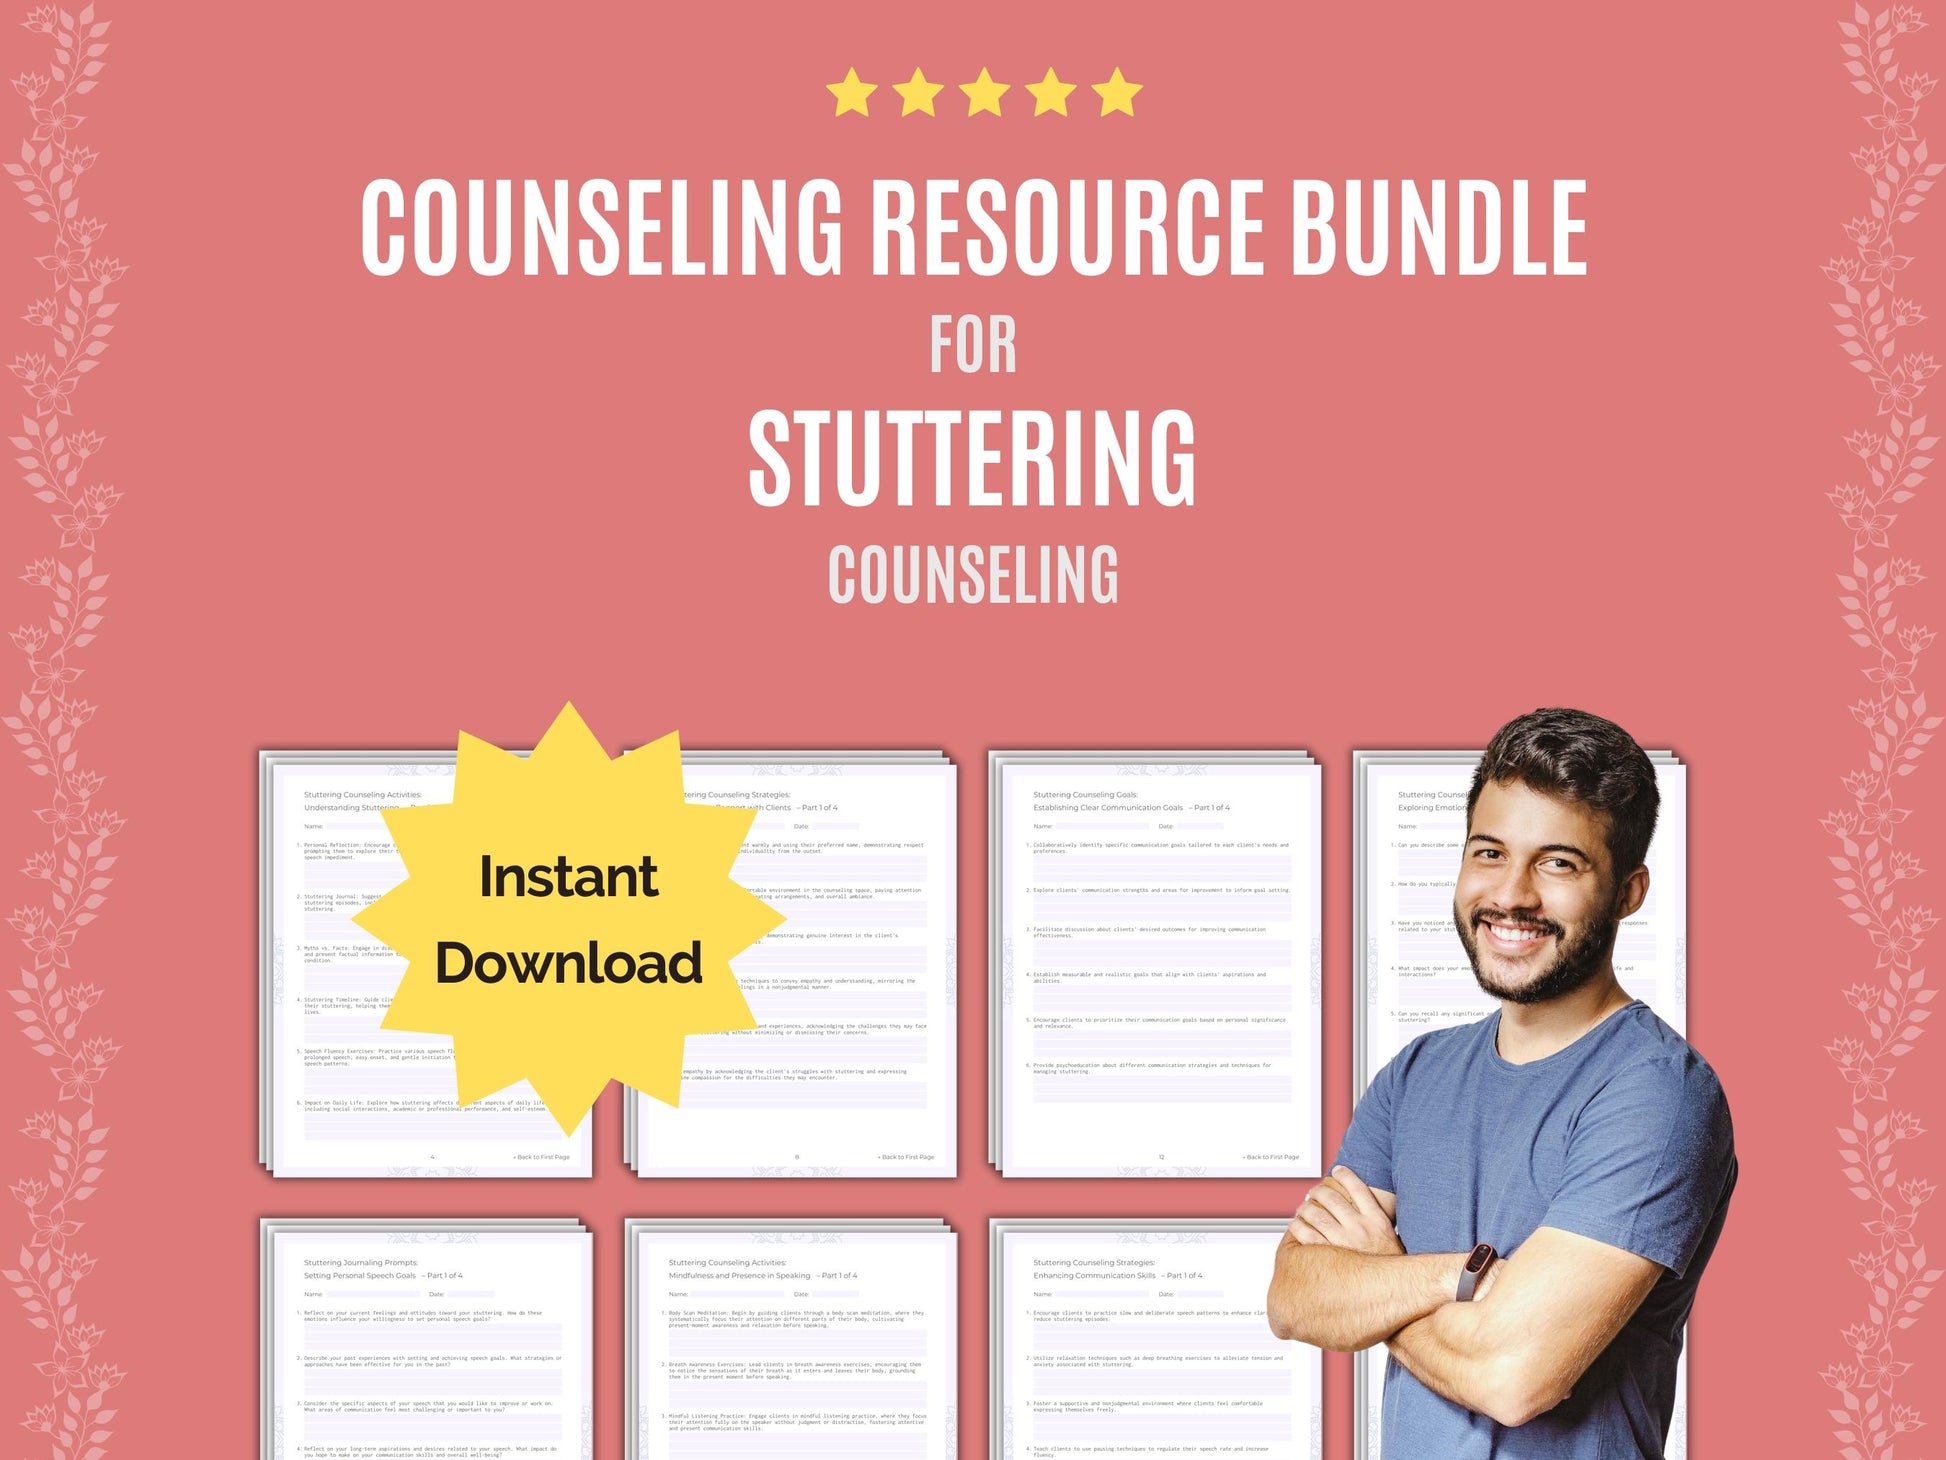 Stuttering Template, Counseling, Stuttering Idea, Stuttering Resource, Stuttering Bundle, Stuttering Worksheet, Stuttering Tool, Stuttering Workbook, Therapist, Mental Health, Counselor, Stuttering, Stuttering Therapy